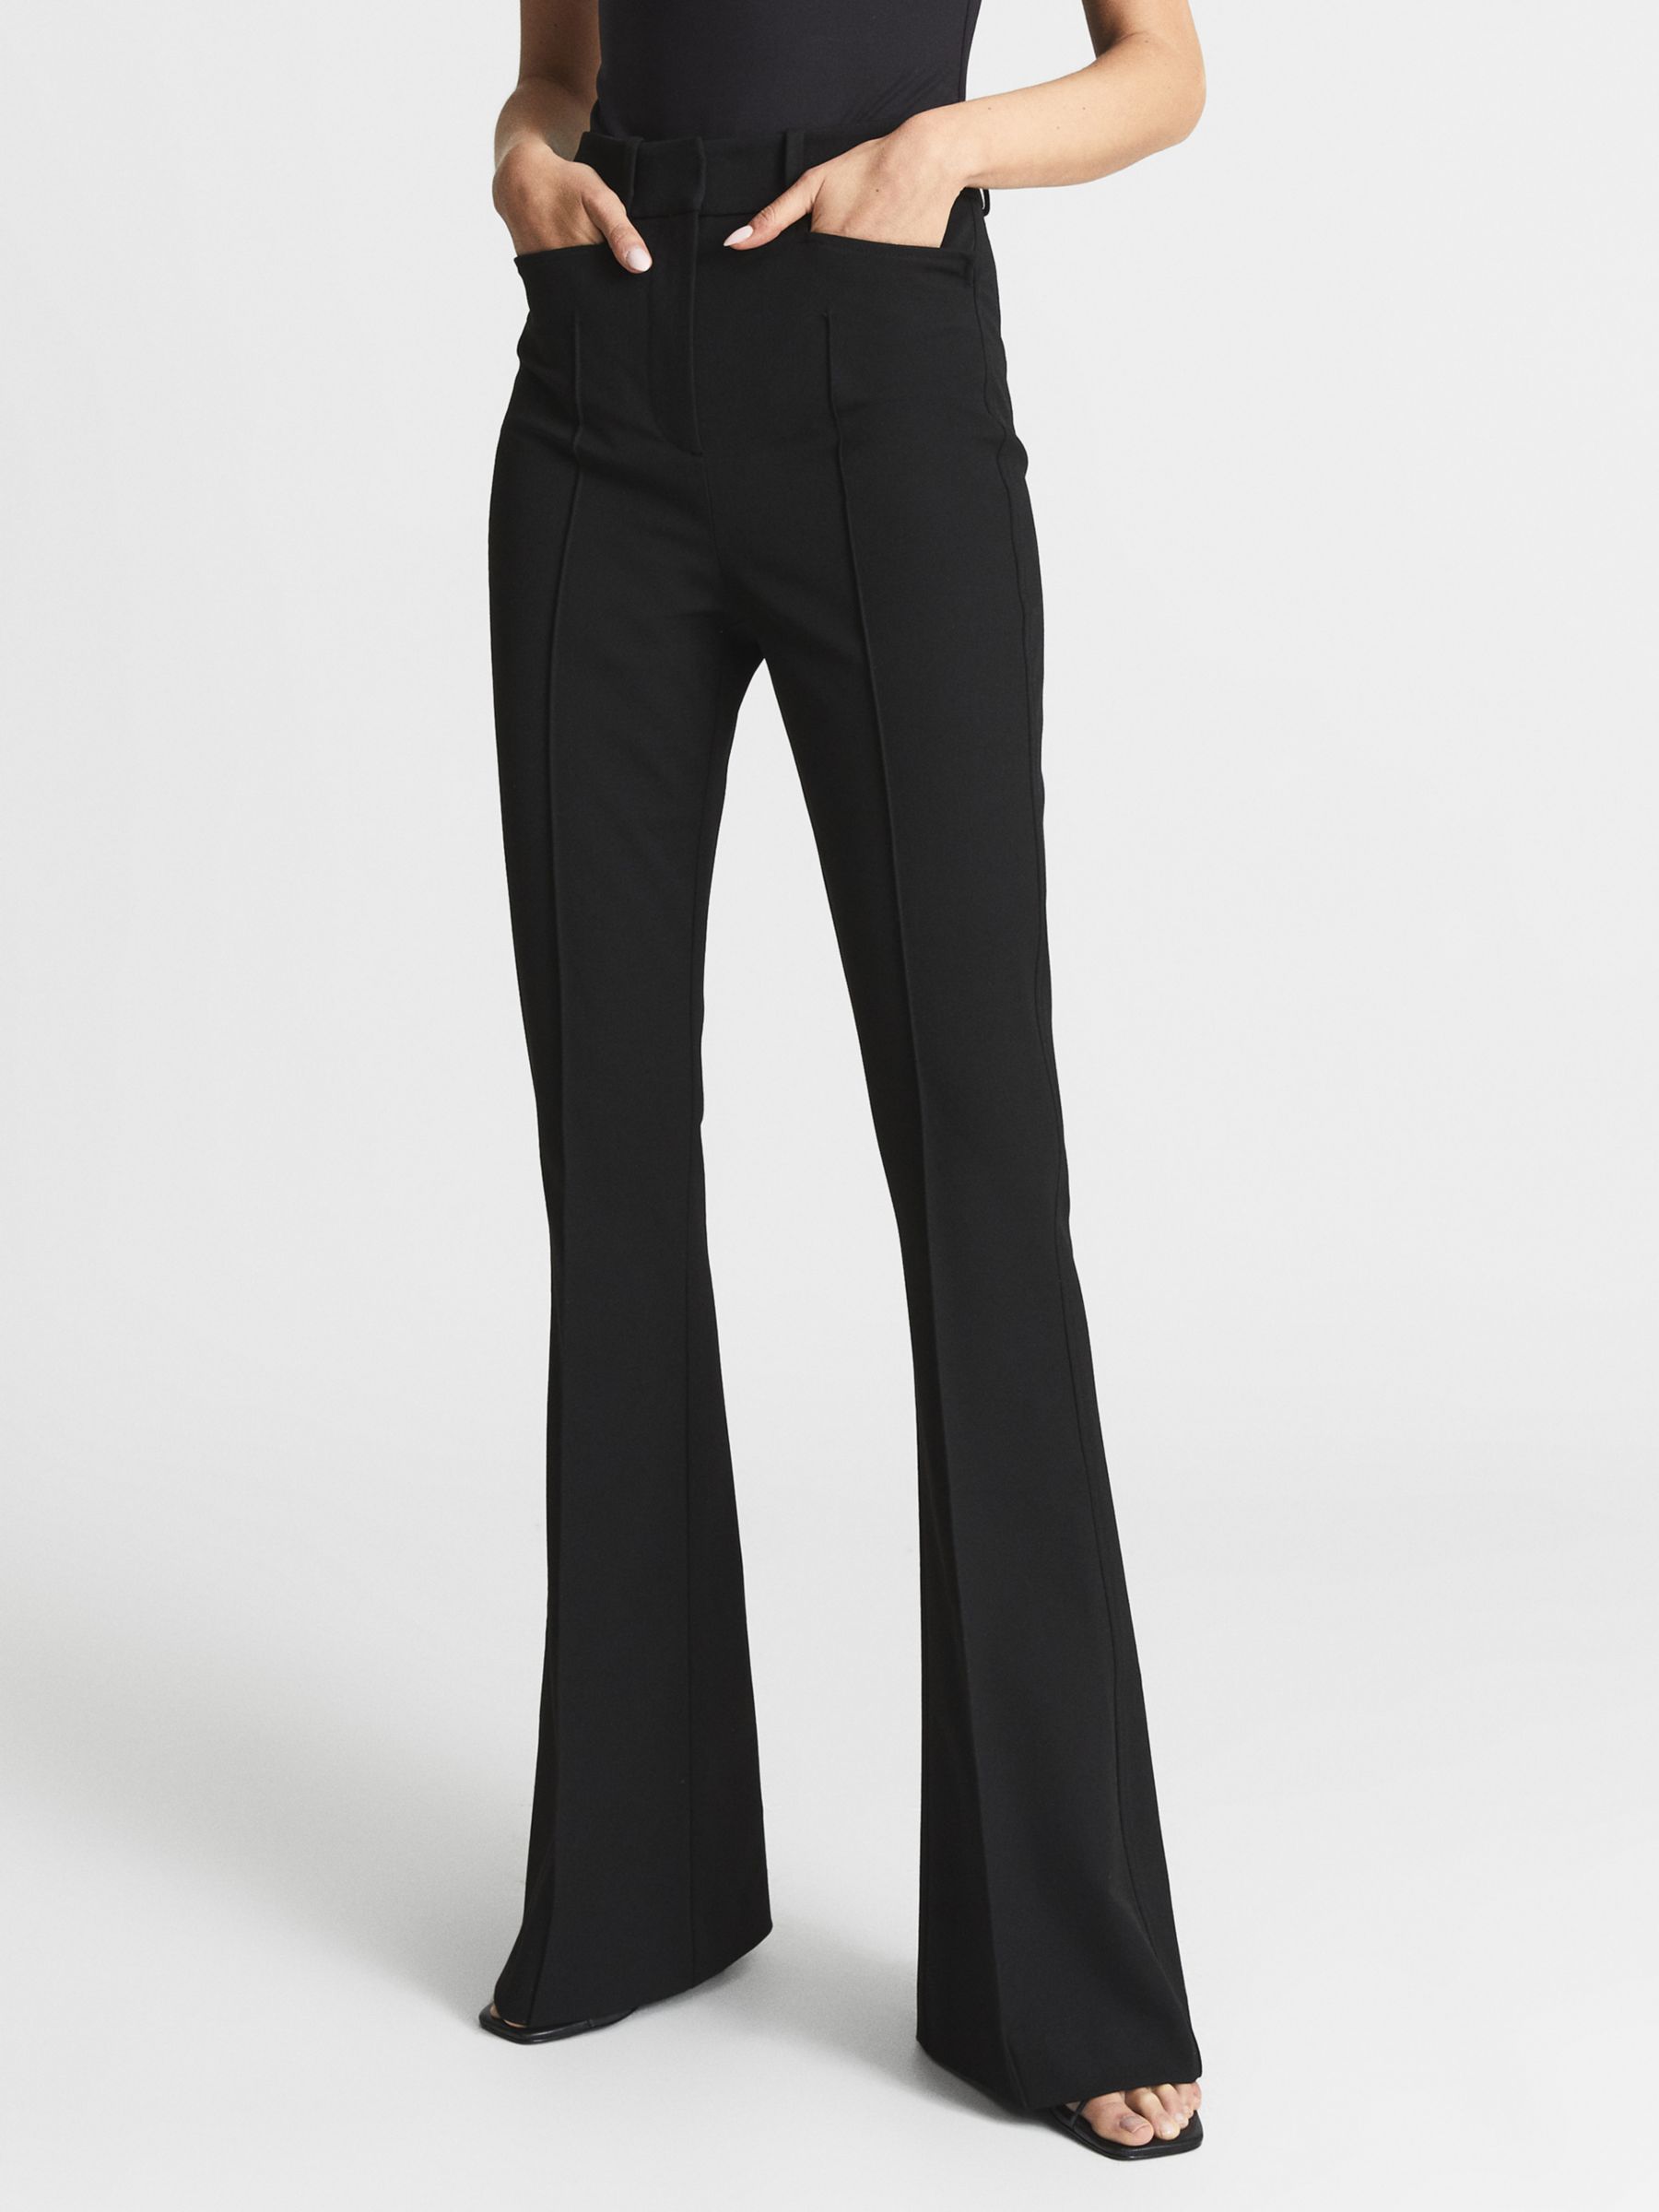 Reiss Dylan Flared Trousers, Black at John Lewis & Partners